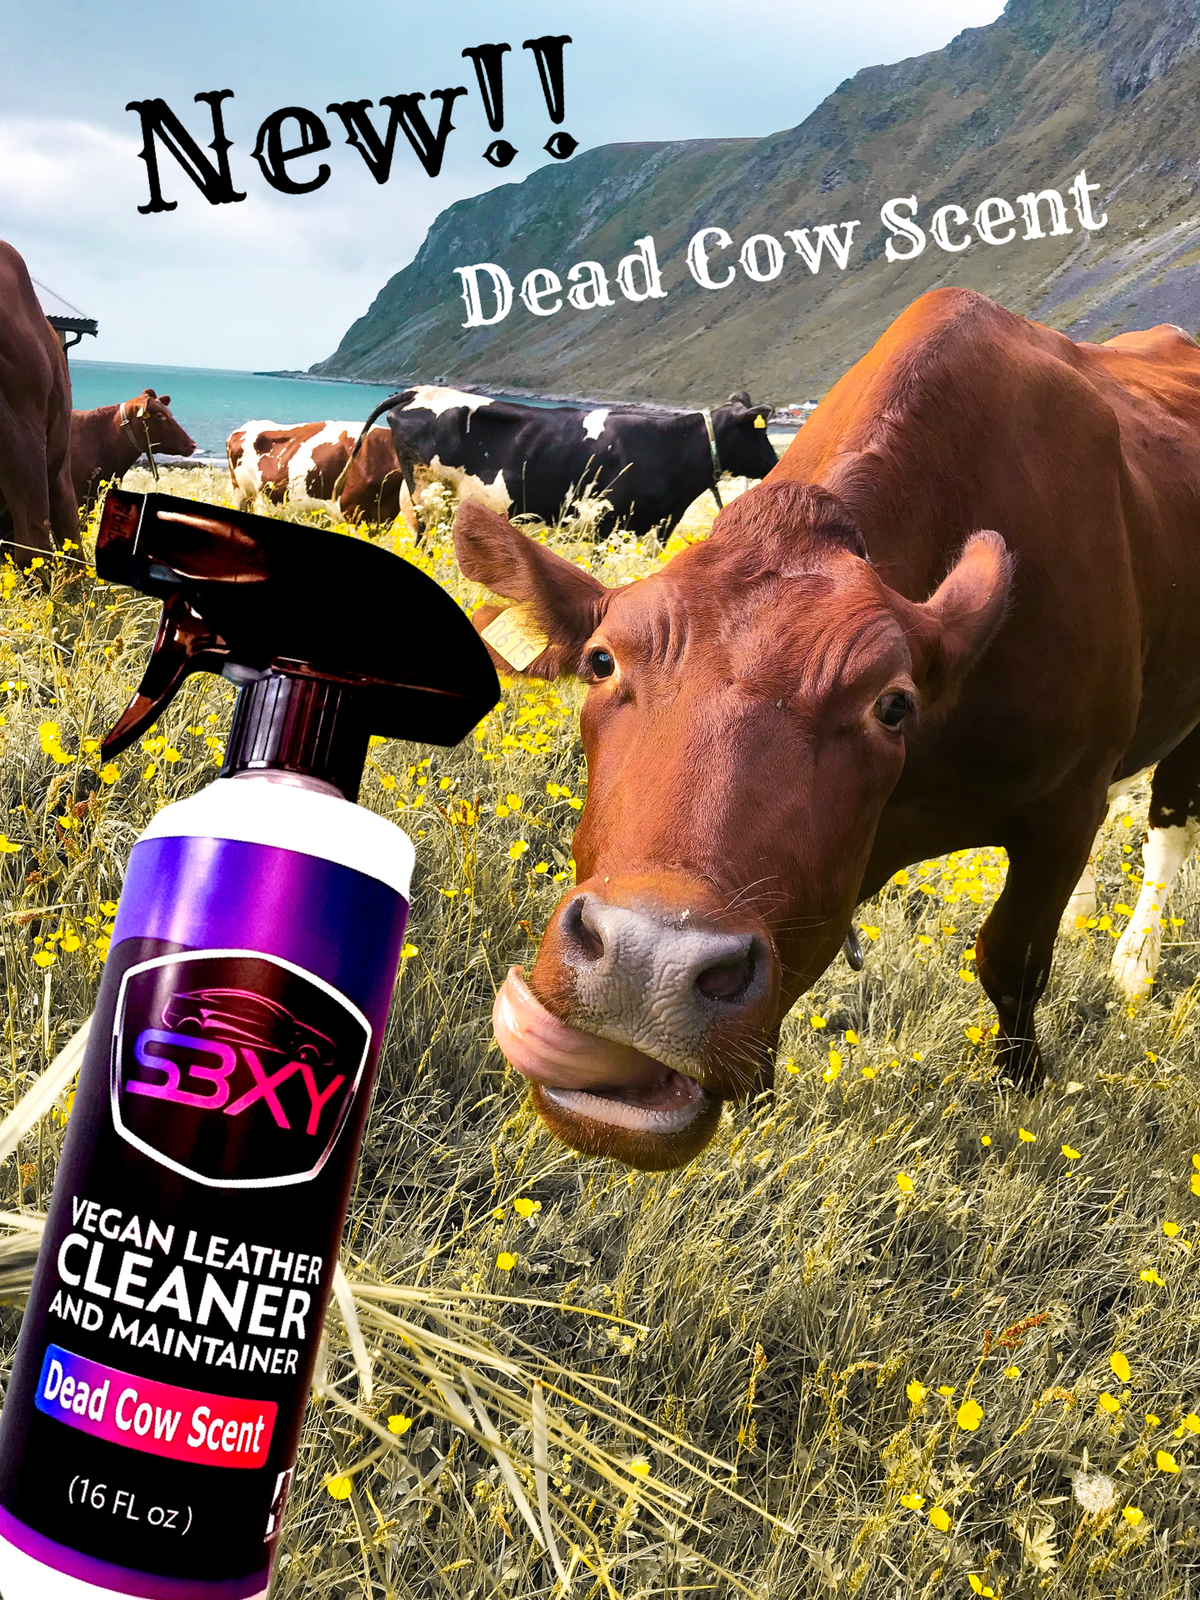 New! Dead Cow Scent (Leather Scent)